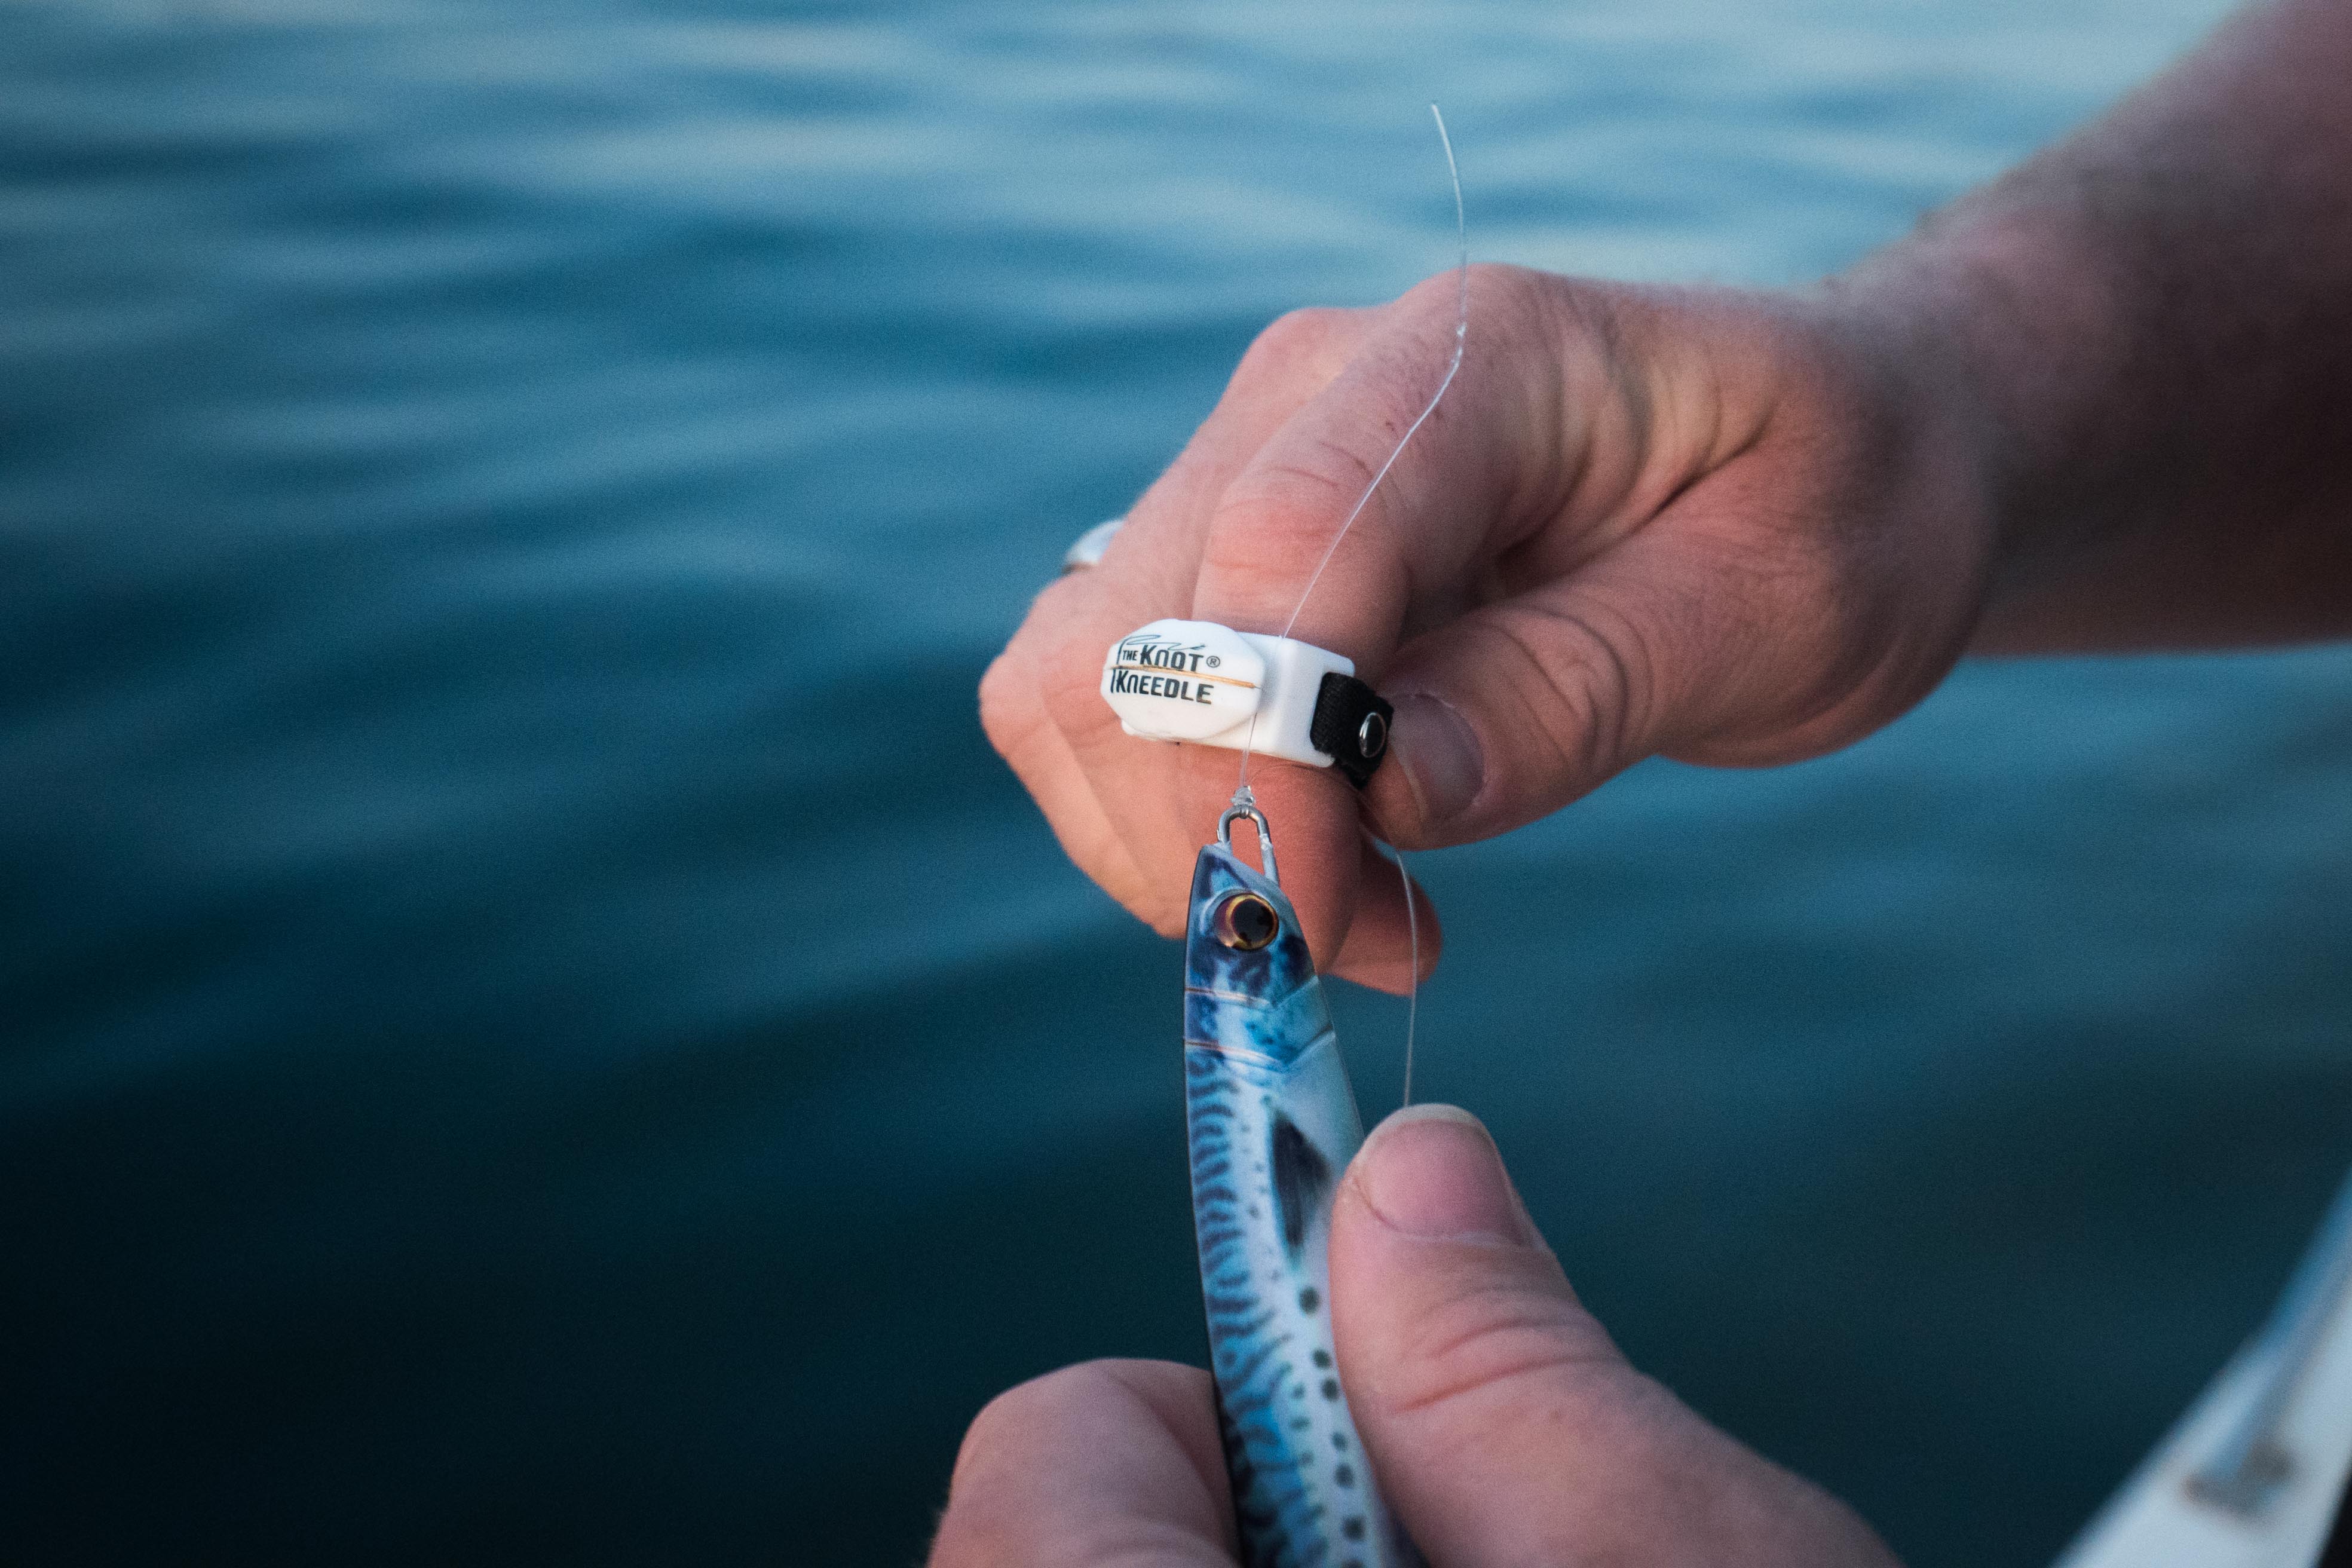 Line Cutterz Ring: Where To Buy $12 Shark Tank Fishing Line